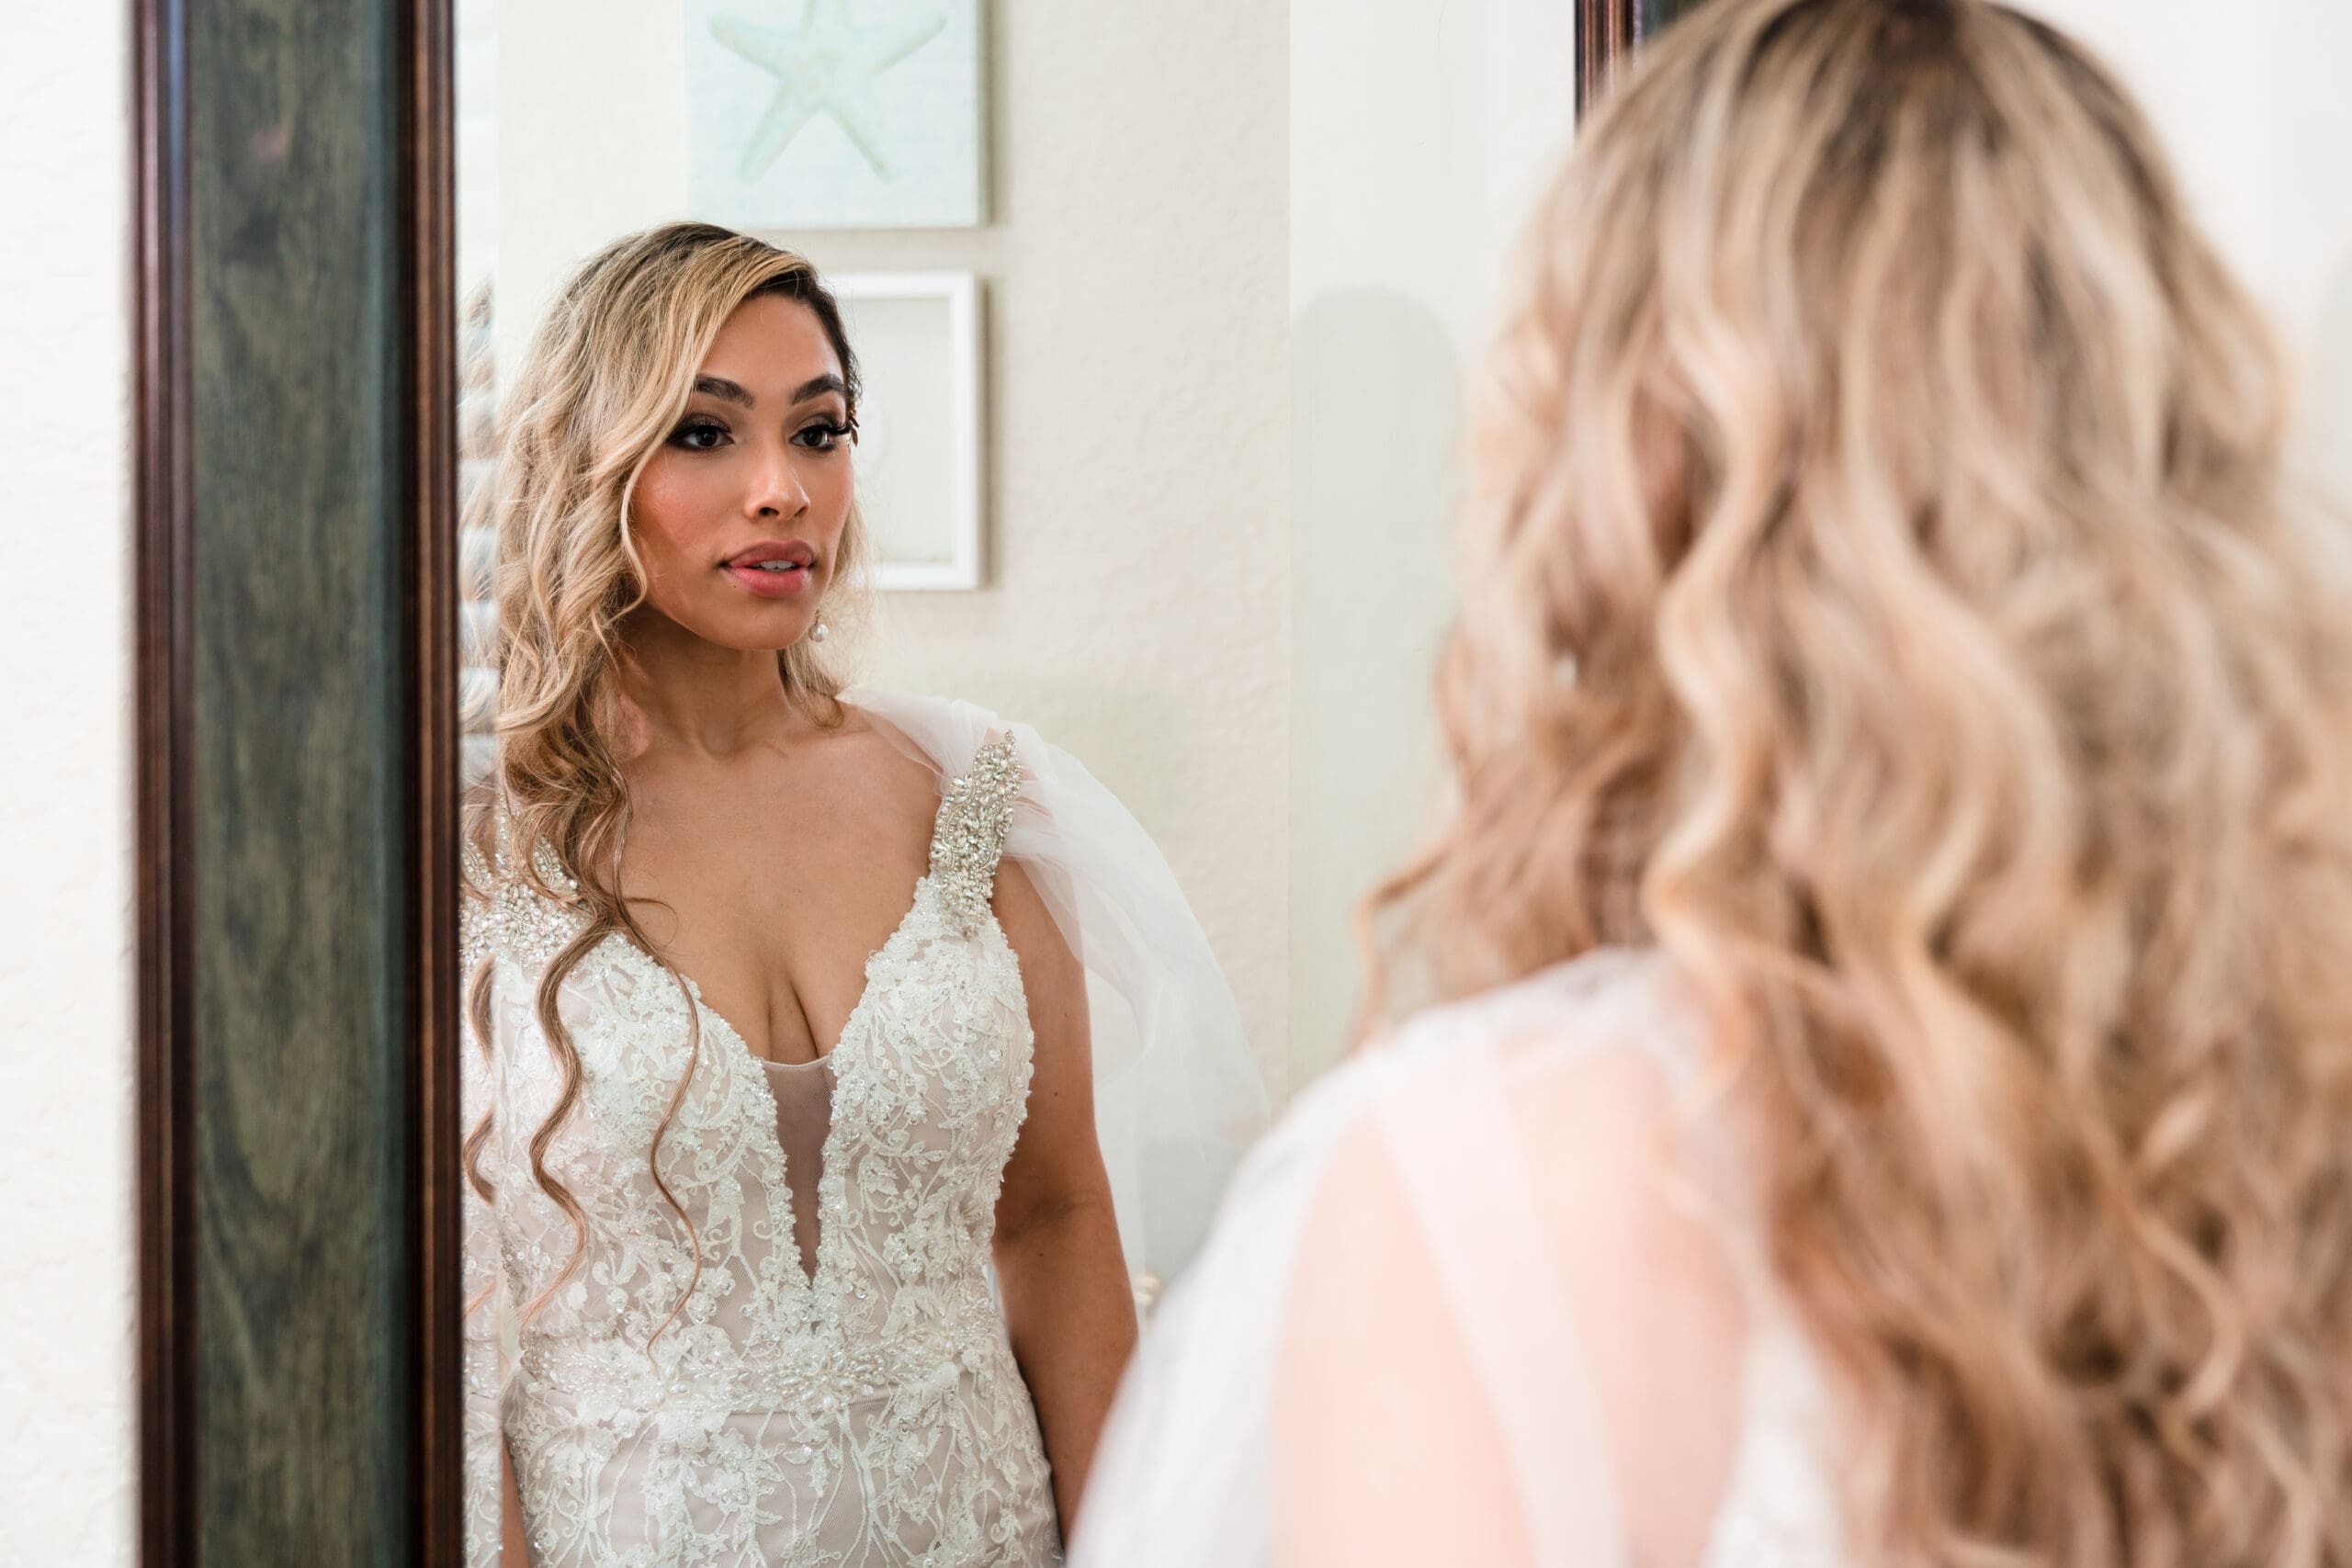 Jenn admiring her final bridal look in the mirror of the bridal suite at the Crystal Ballroom